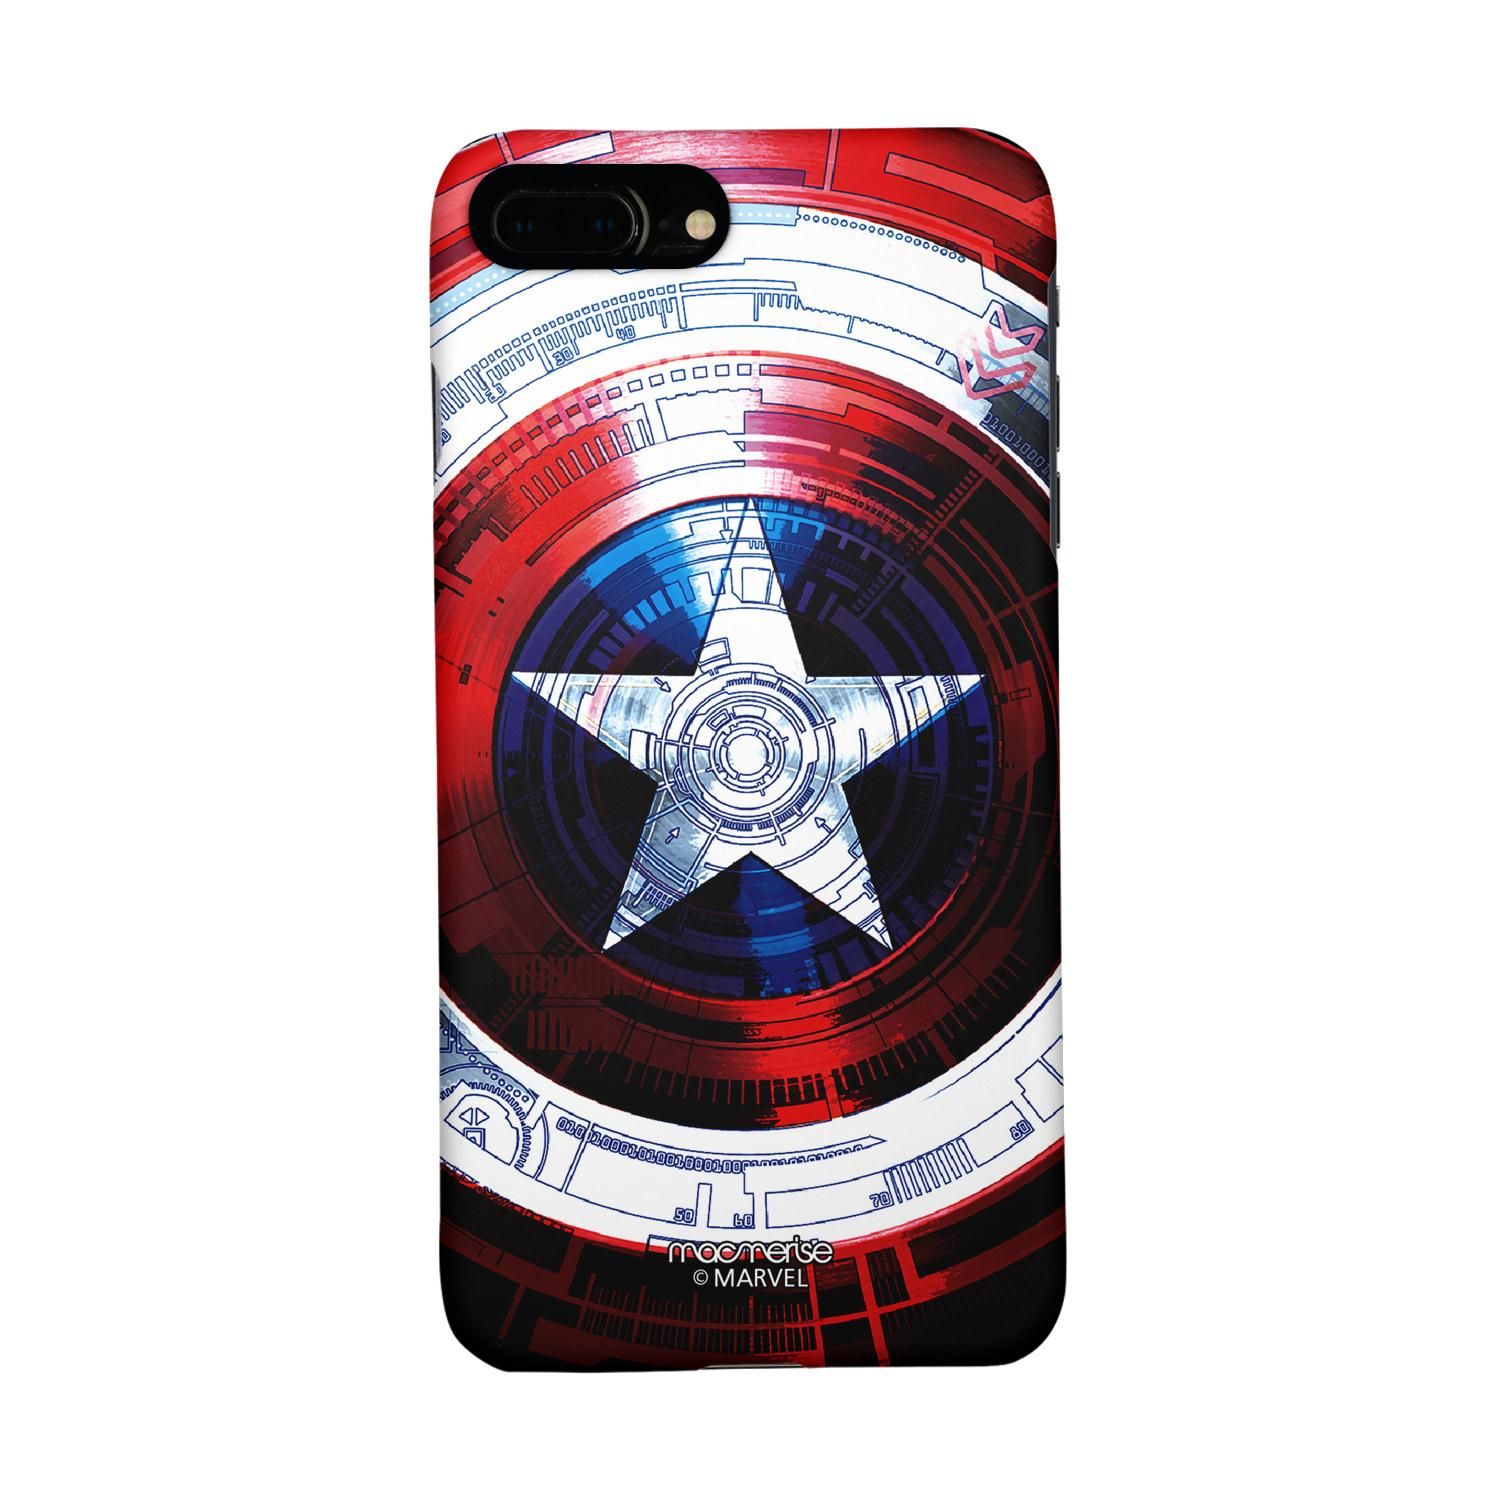 Buy Captains Shield Decoded - Sleek Phone Case for iPhone 7 Plus Online